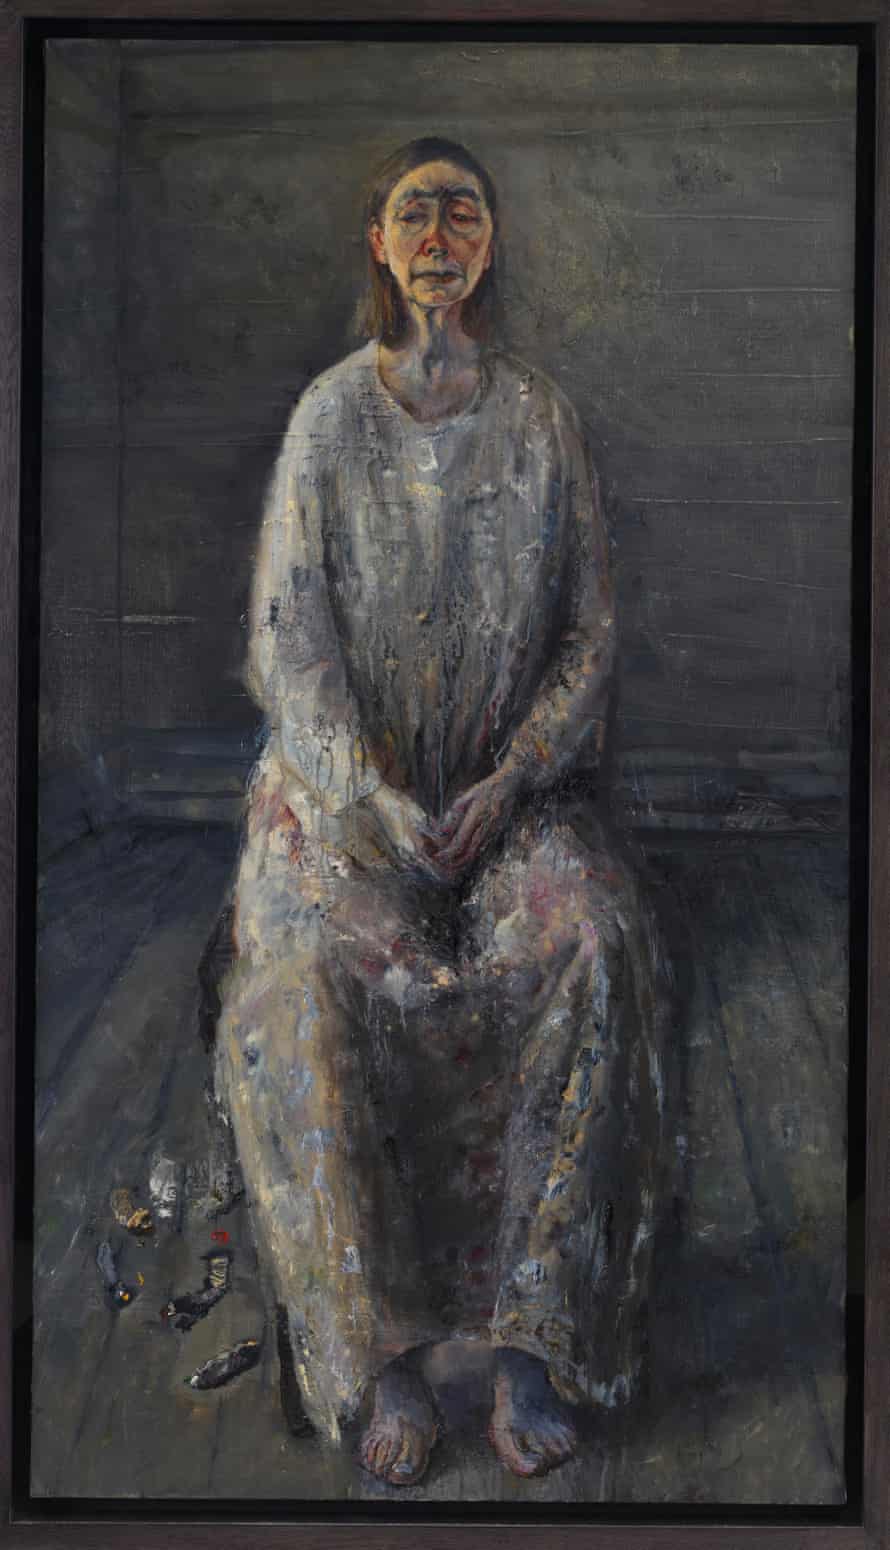 Celia Paul (b.1959) Painter and Model 2012 Oil paint on canvas 1372 x 762 mm © Celia Paul, courtesy the artist and Victoria Miro, London / Venice ALL TOO HUMAN:BACON, FREUD AND A CENTURY OF PAINTING LIFE 28 February – 27 August 2018